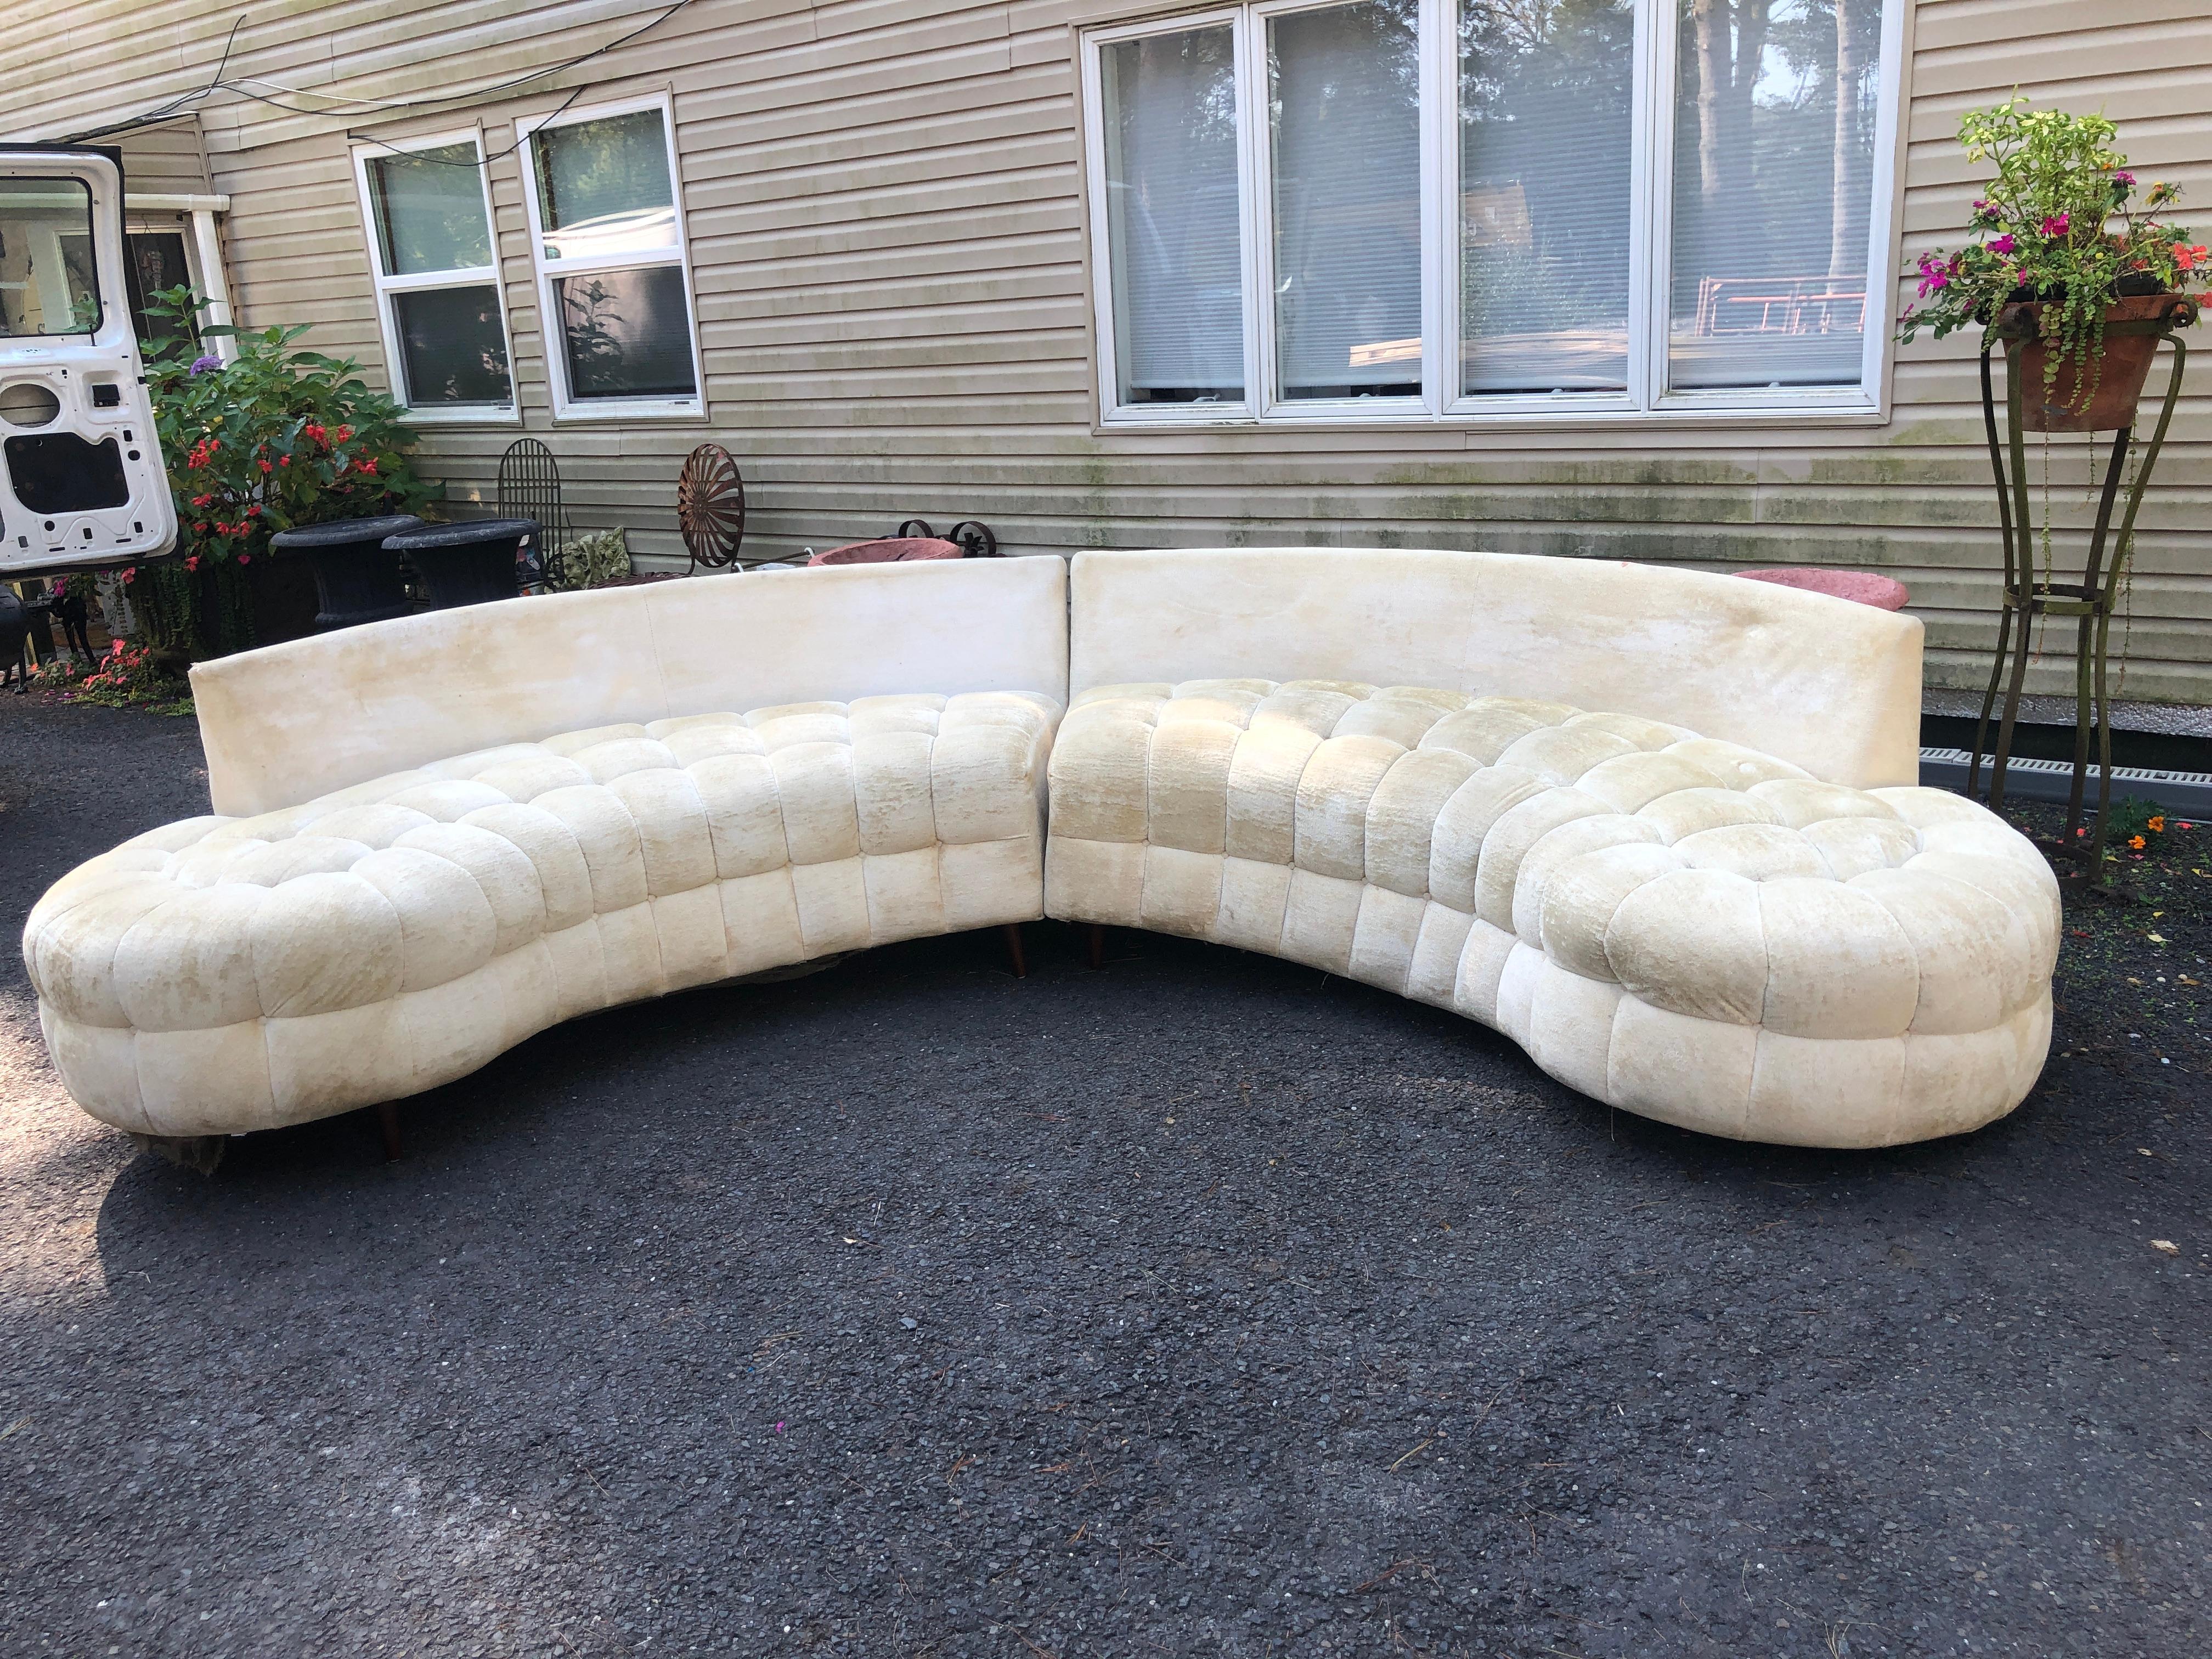 American Wonderful Curved Serpentine Two-Piece Adrian Pearsall Style Sectional Sofa For Sale